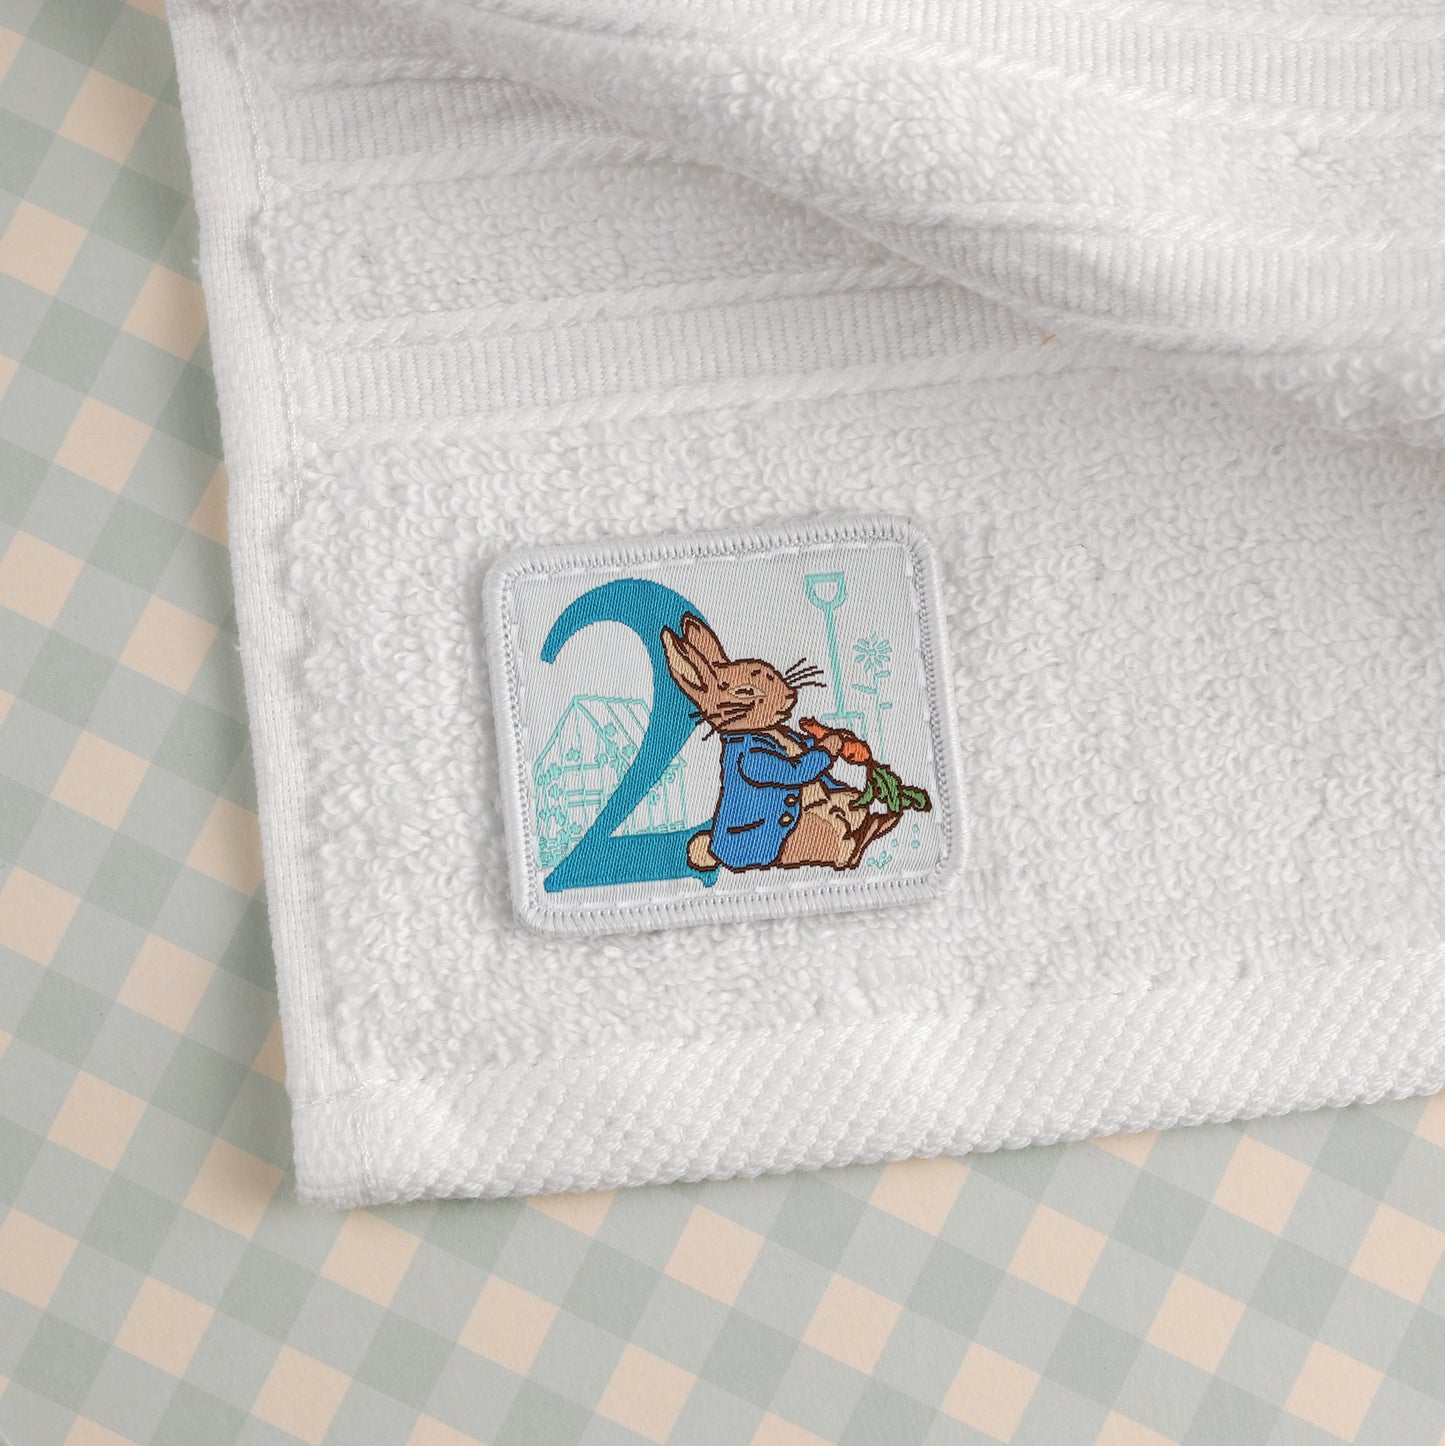 2 Year Old Peter Rabbit Woven Patch - Beatrix Potter